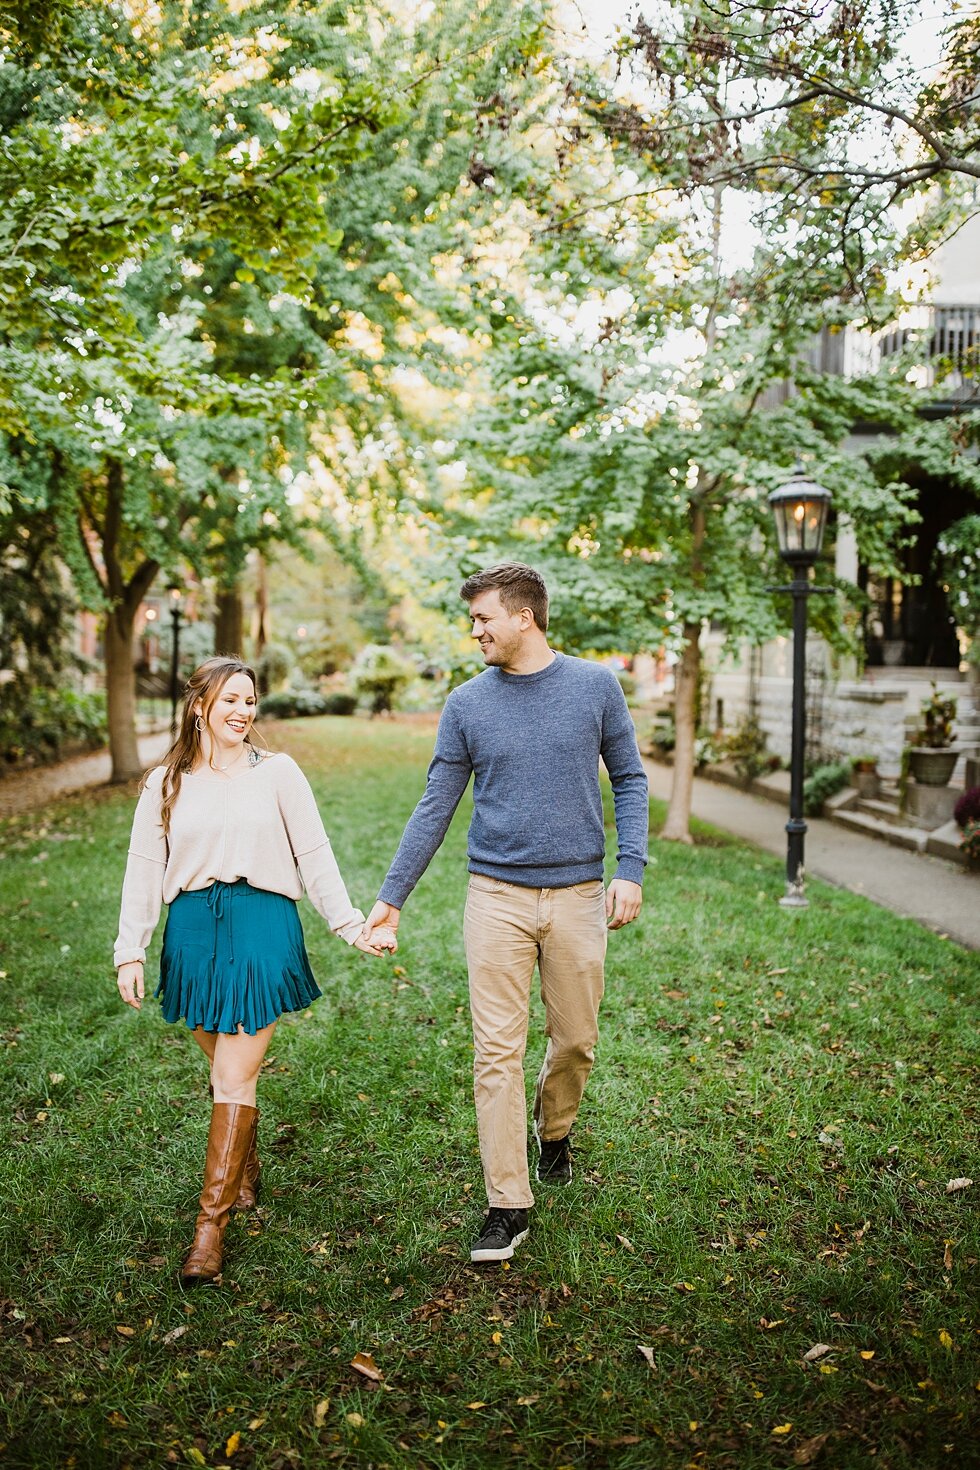  Walking hand in hand in St James enjoying the beautiful day. Louisville photographer engagements urban roof top anniversary romantic kentucky candles love #engagementphotos #savethedatephotos #savethedates #engagementphotography  #StJamesCourt #gard